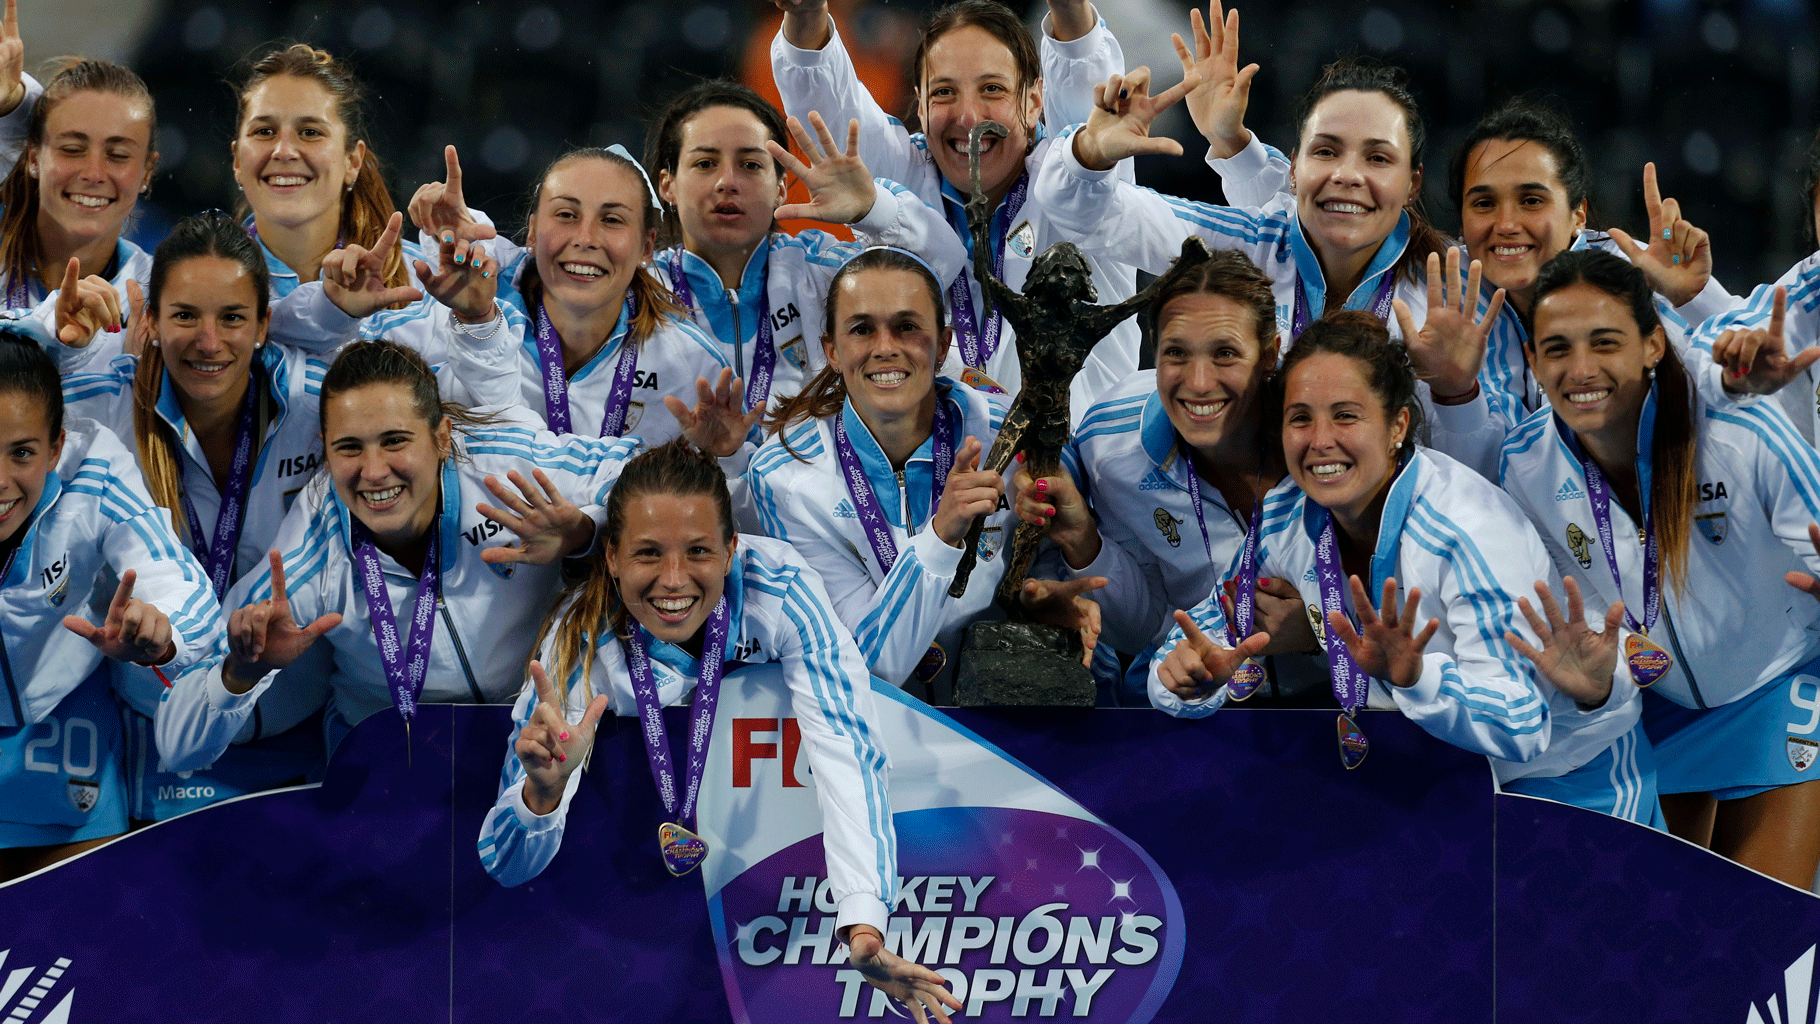 Argentina’s field hockey team beat Netherlands to win the FIH Women’s Champions Trophy in London. (Photo: AP)